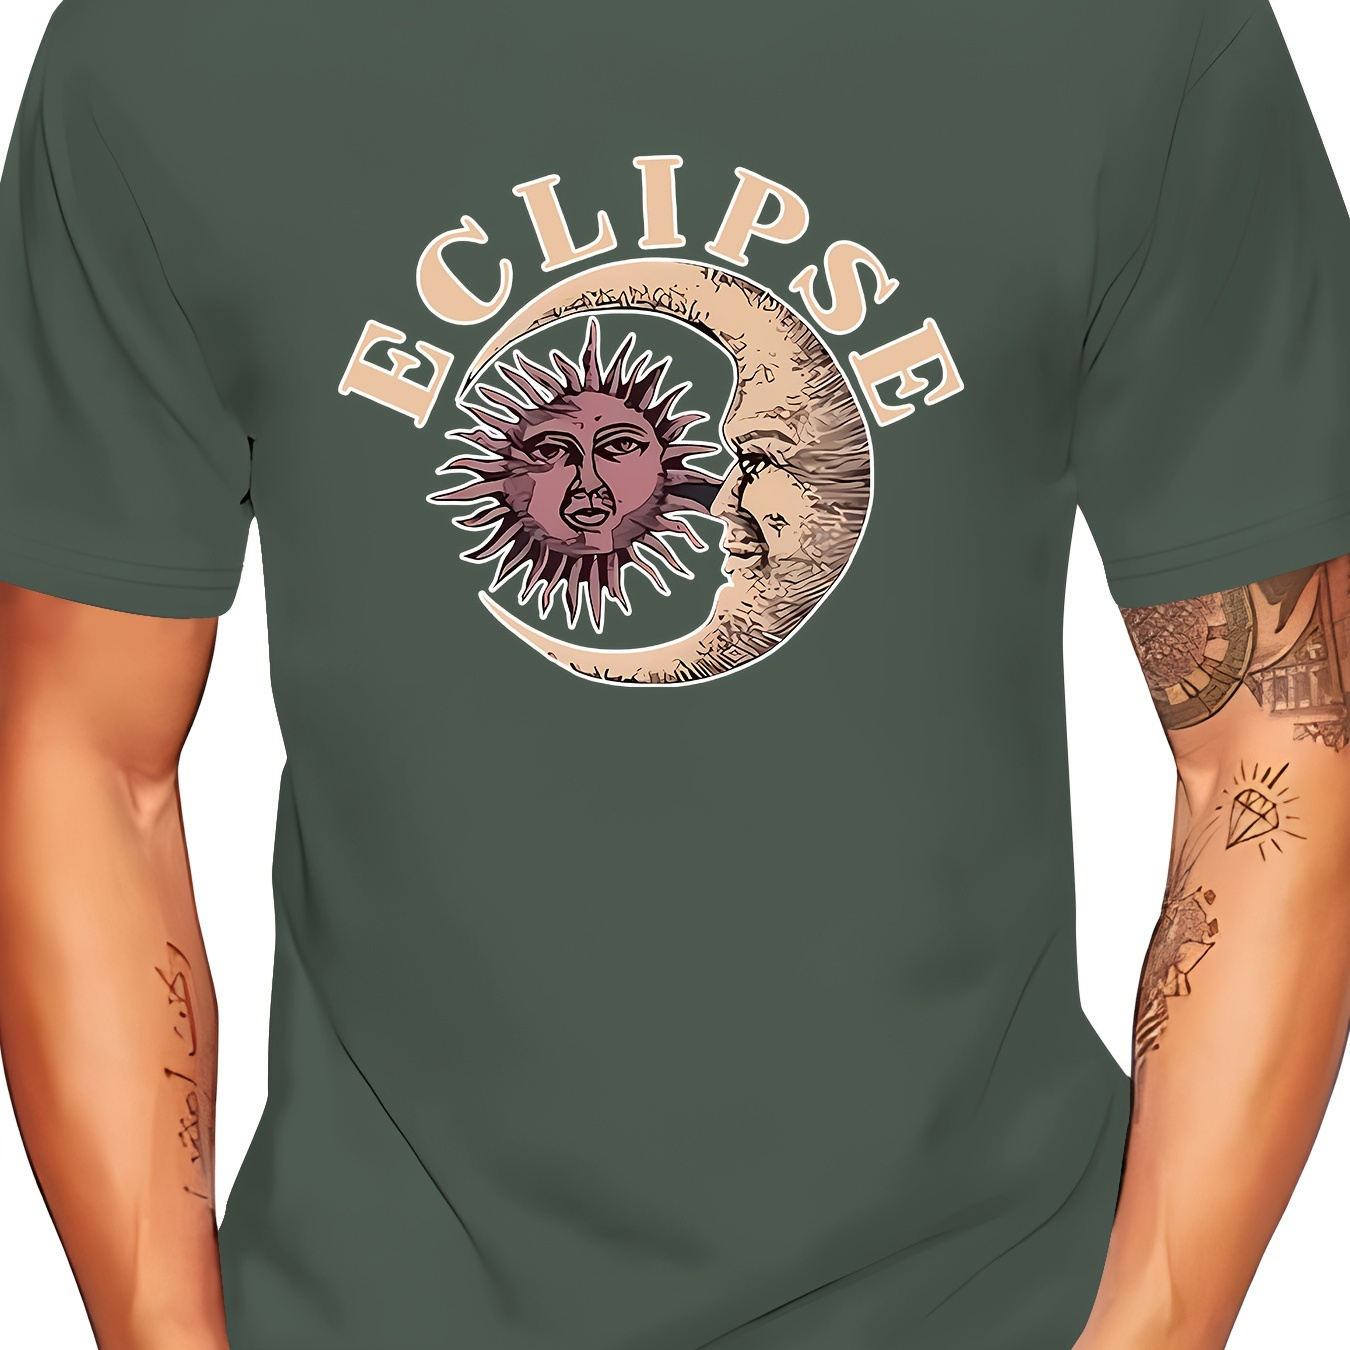 

Eclipse Print T Shirt, Tees For Men, Casual Short Sleeve T-shirt For Summer